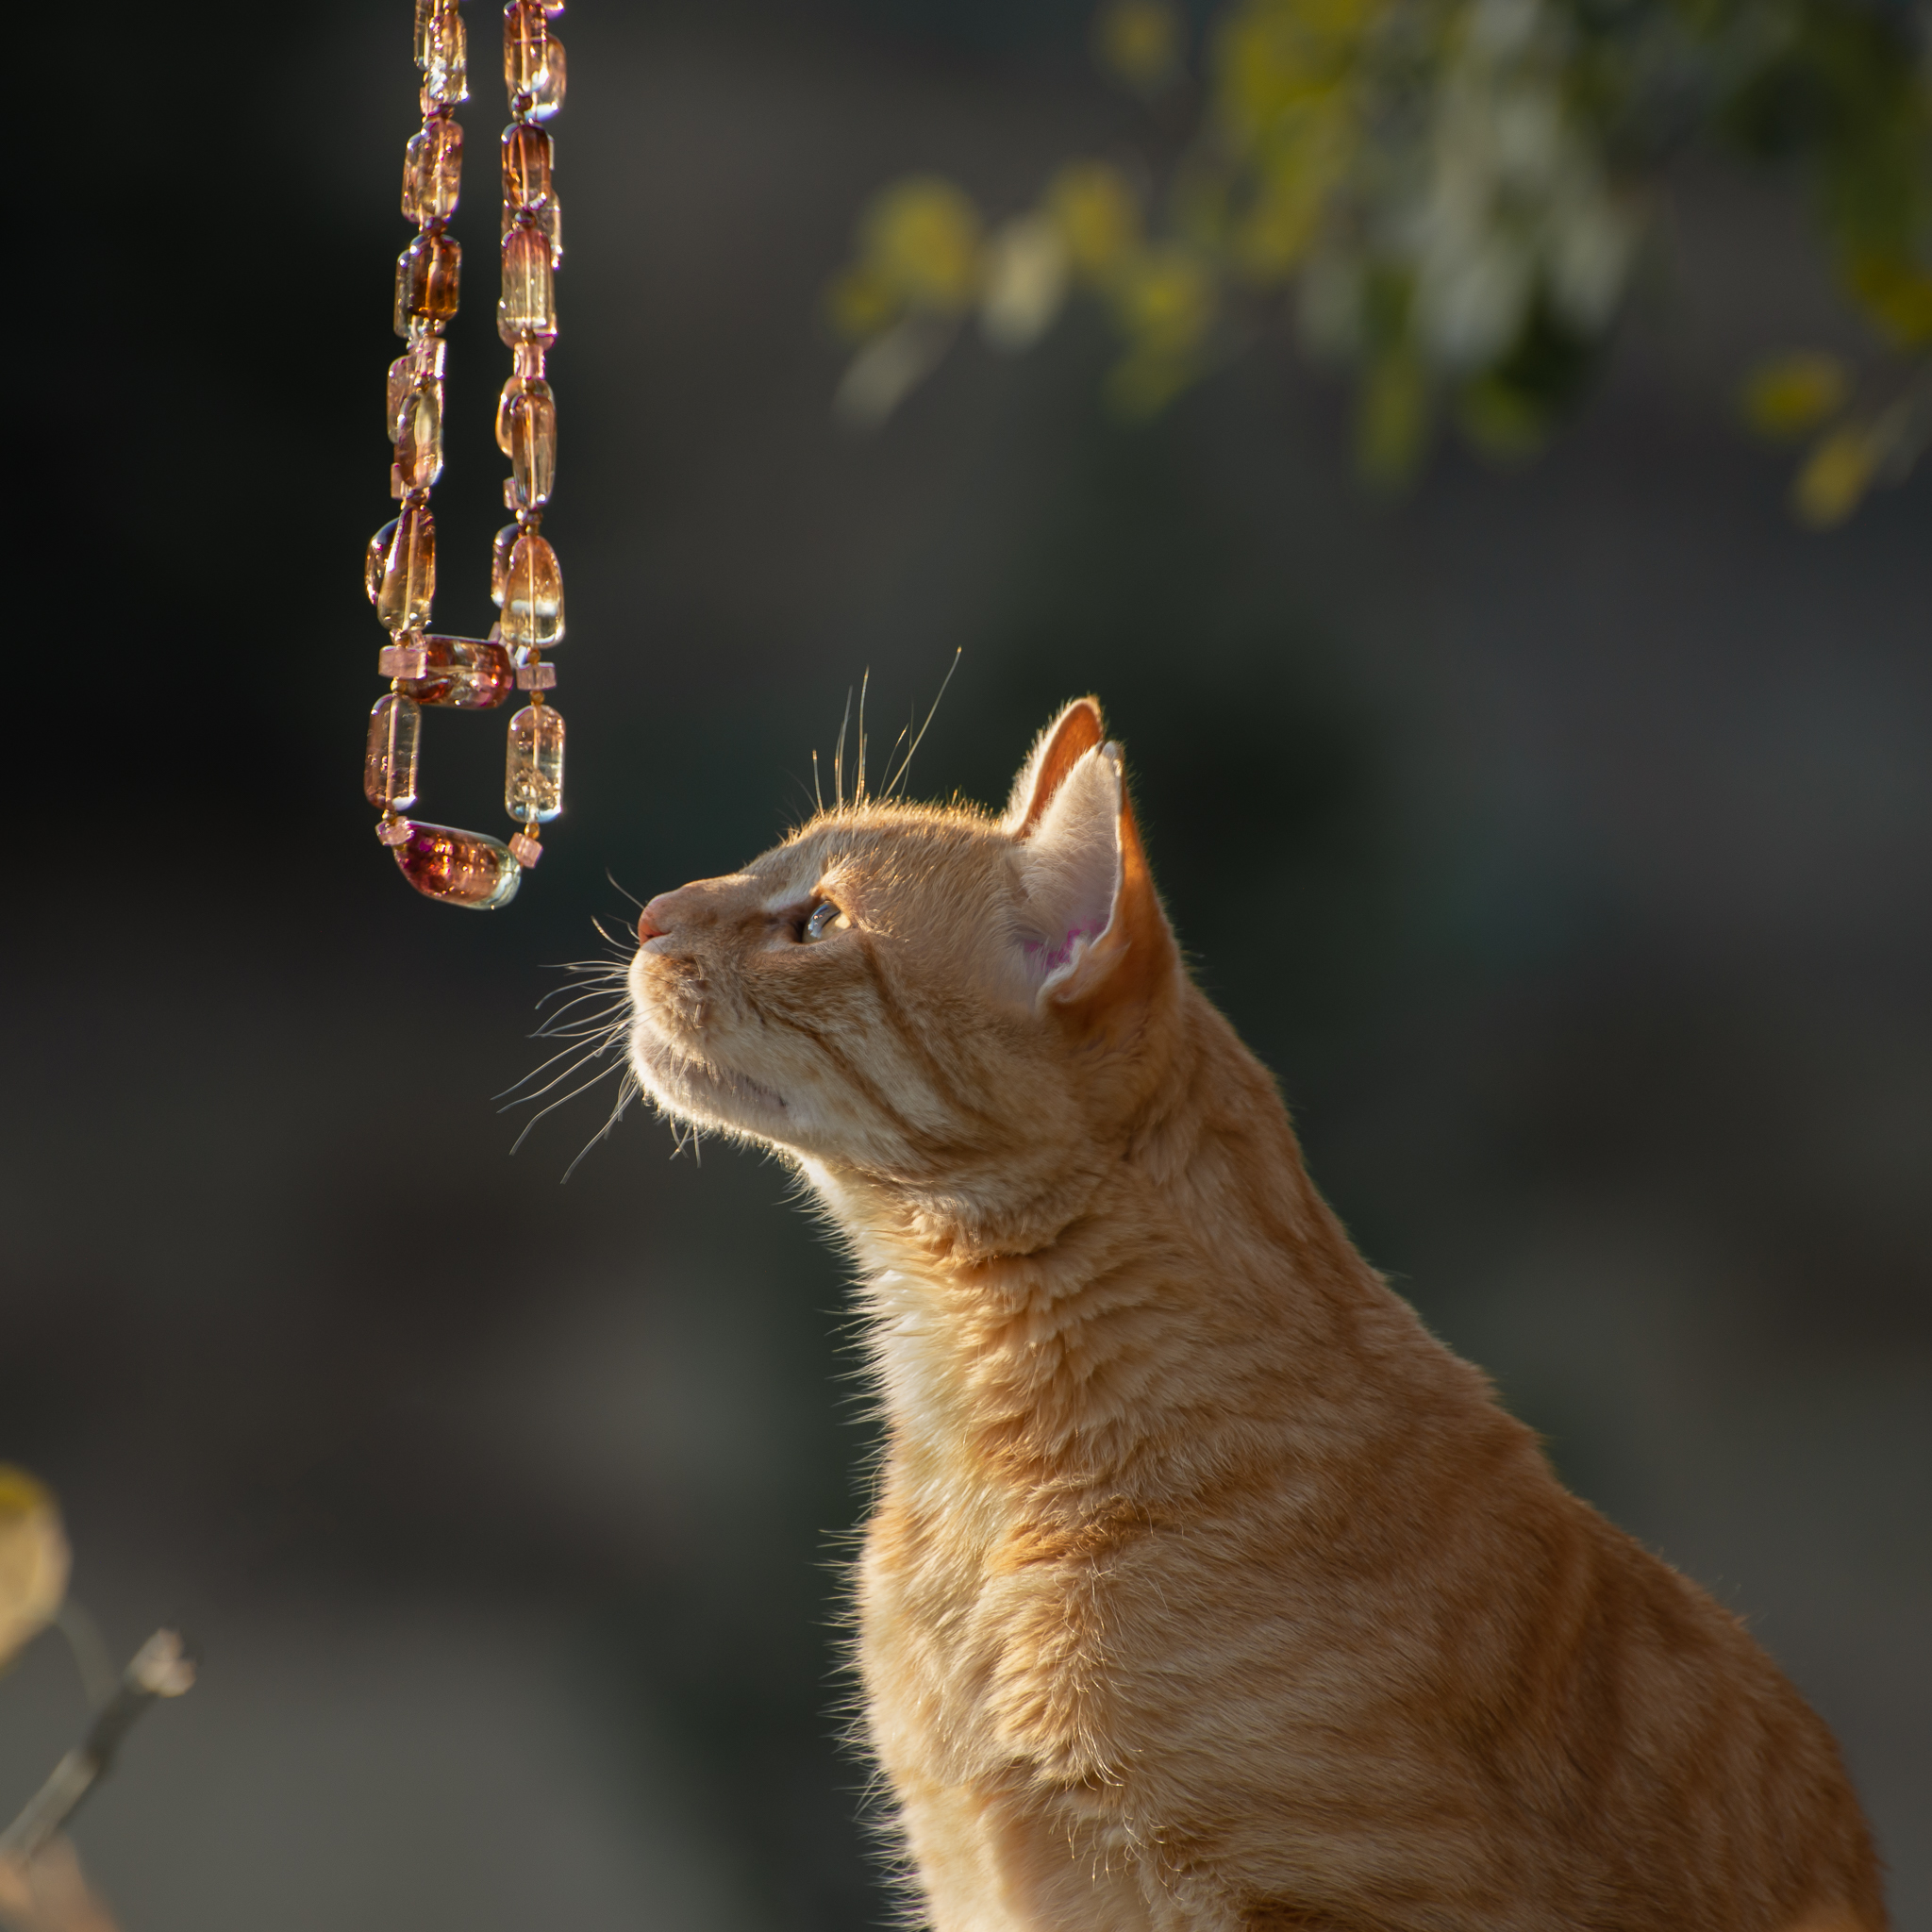 Bento the cat eyeing a multi-colored tourmaline nugget necklace swinging in the air